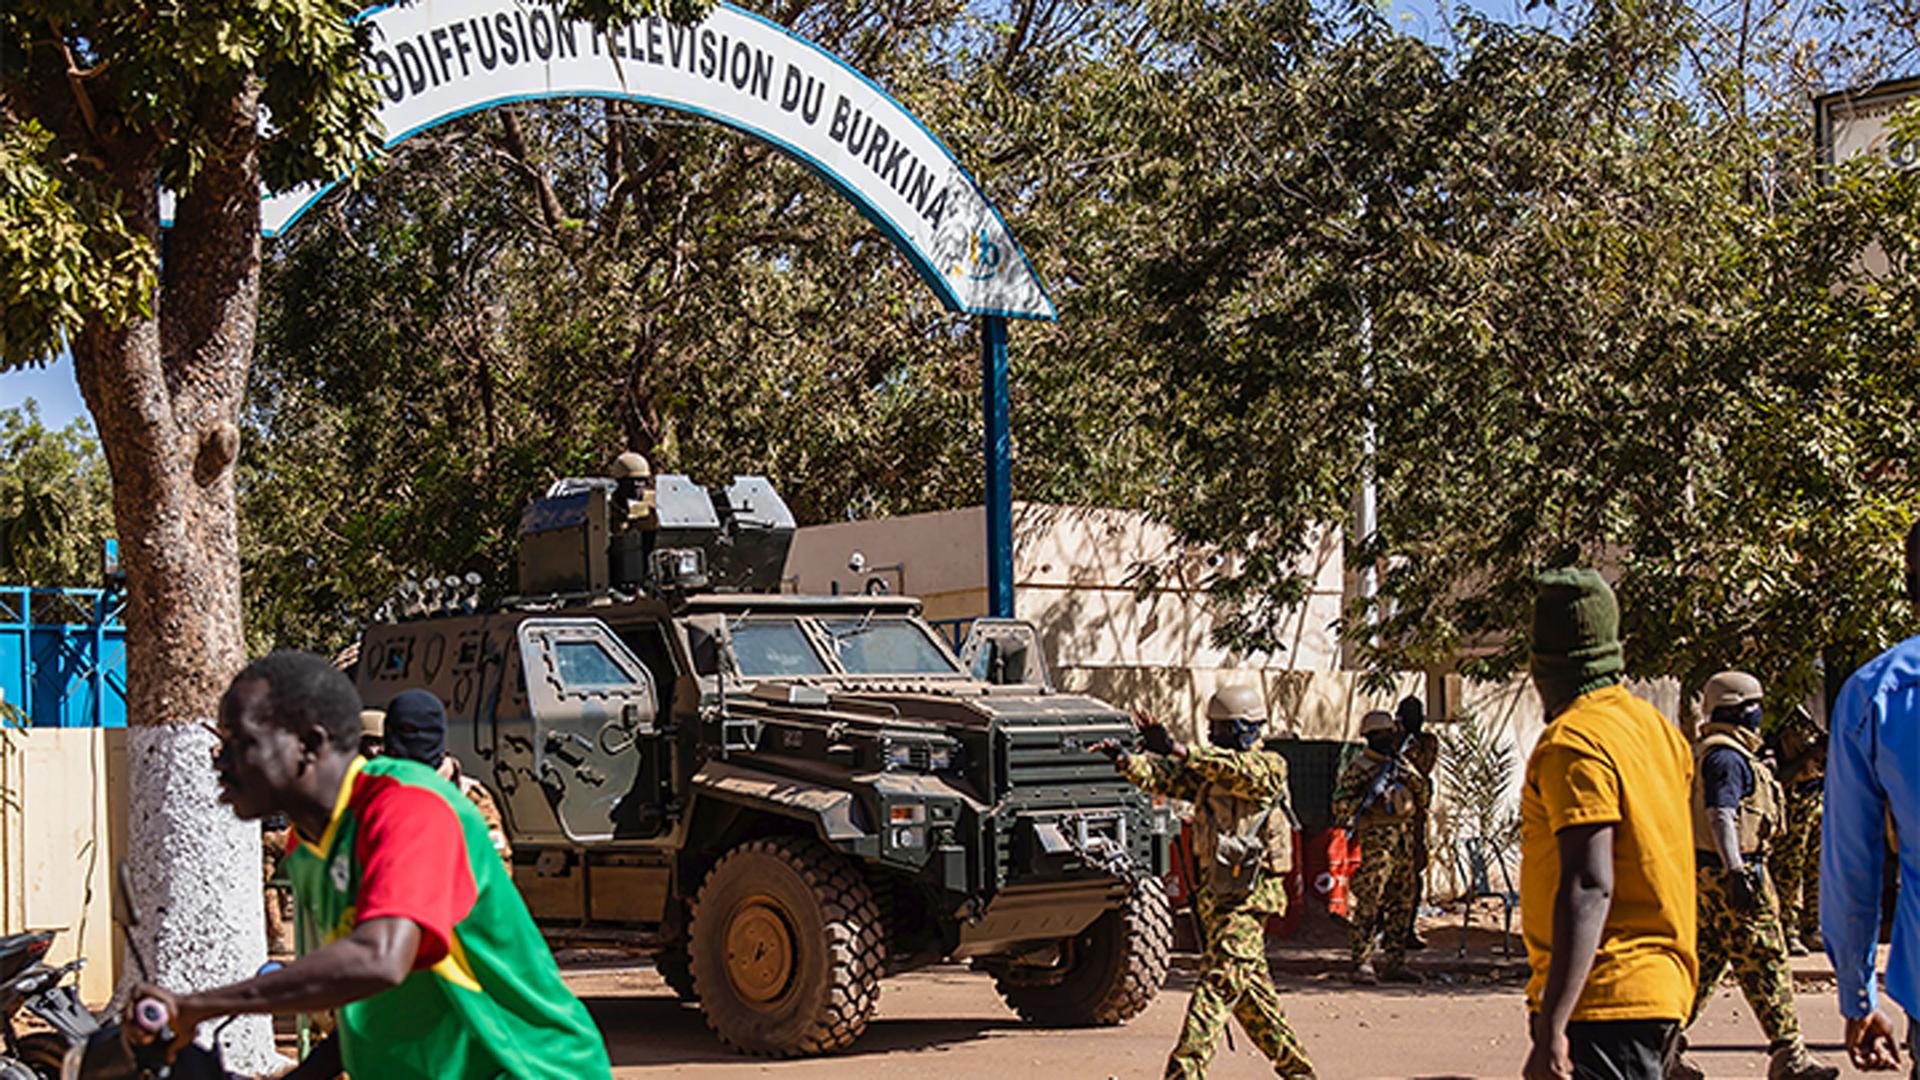 Mutinous soldiers guard the entrance of the national television station in Ouagadougou, Burkina Faso